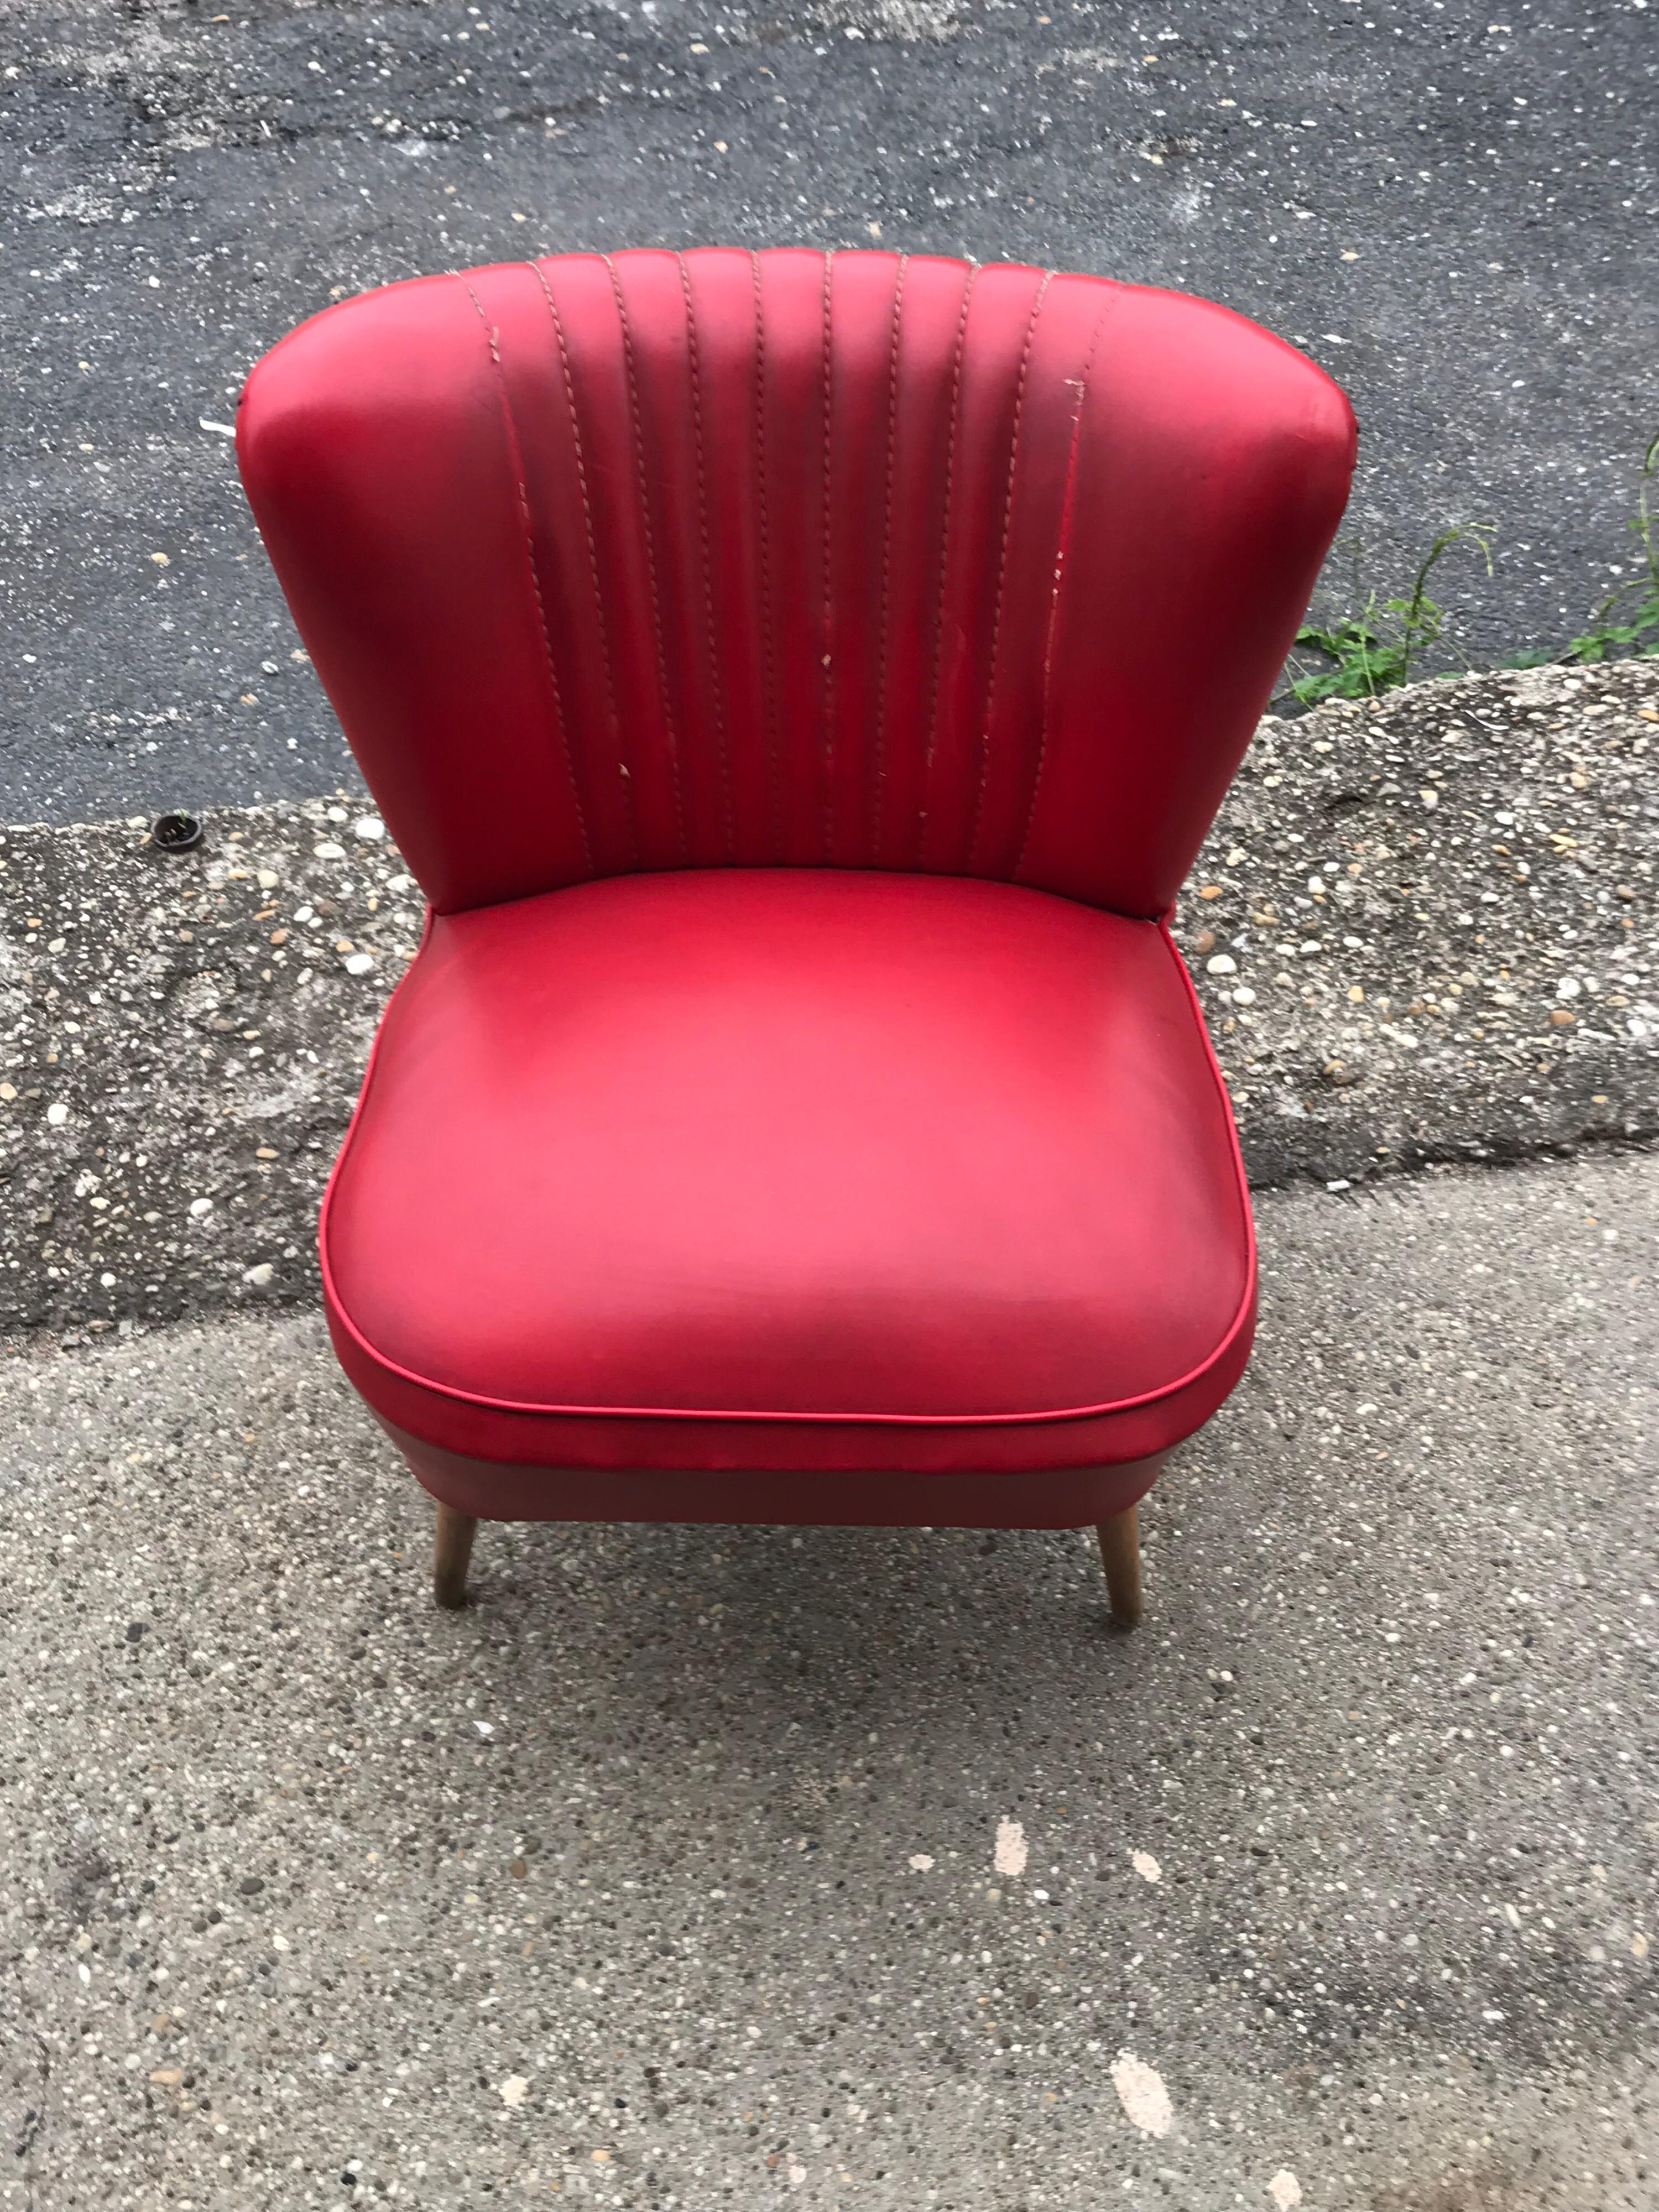 Mid-Century Modern Mid Century 1950s-1960s Original Red Cocktail Chair Armchair For Sale